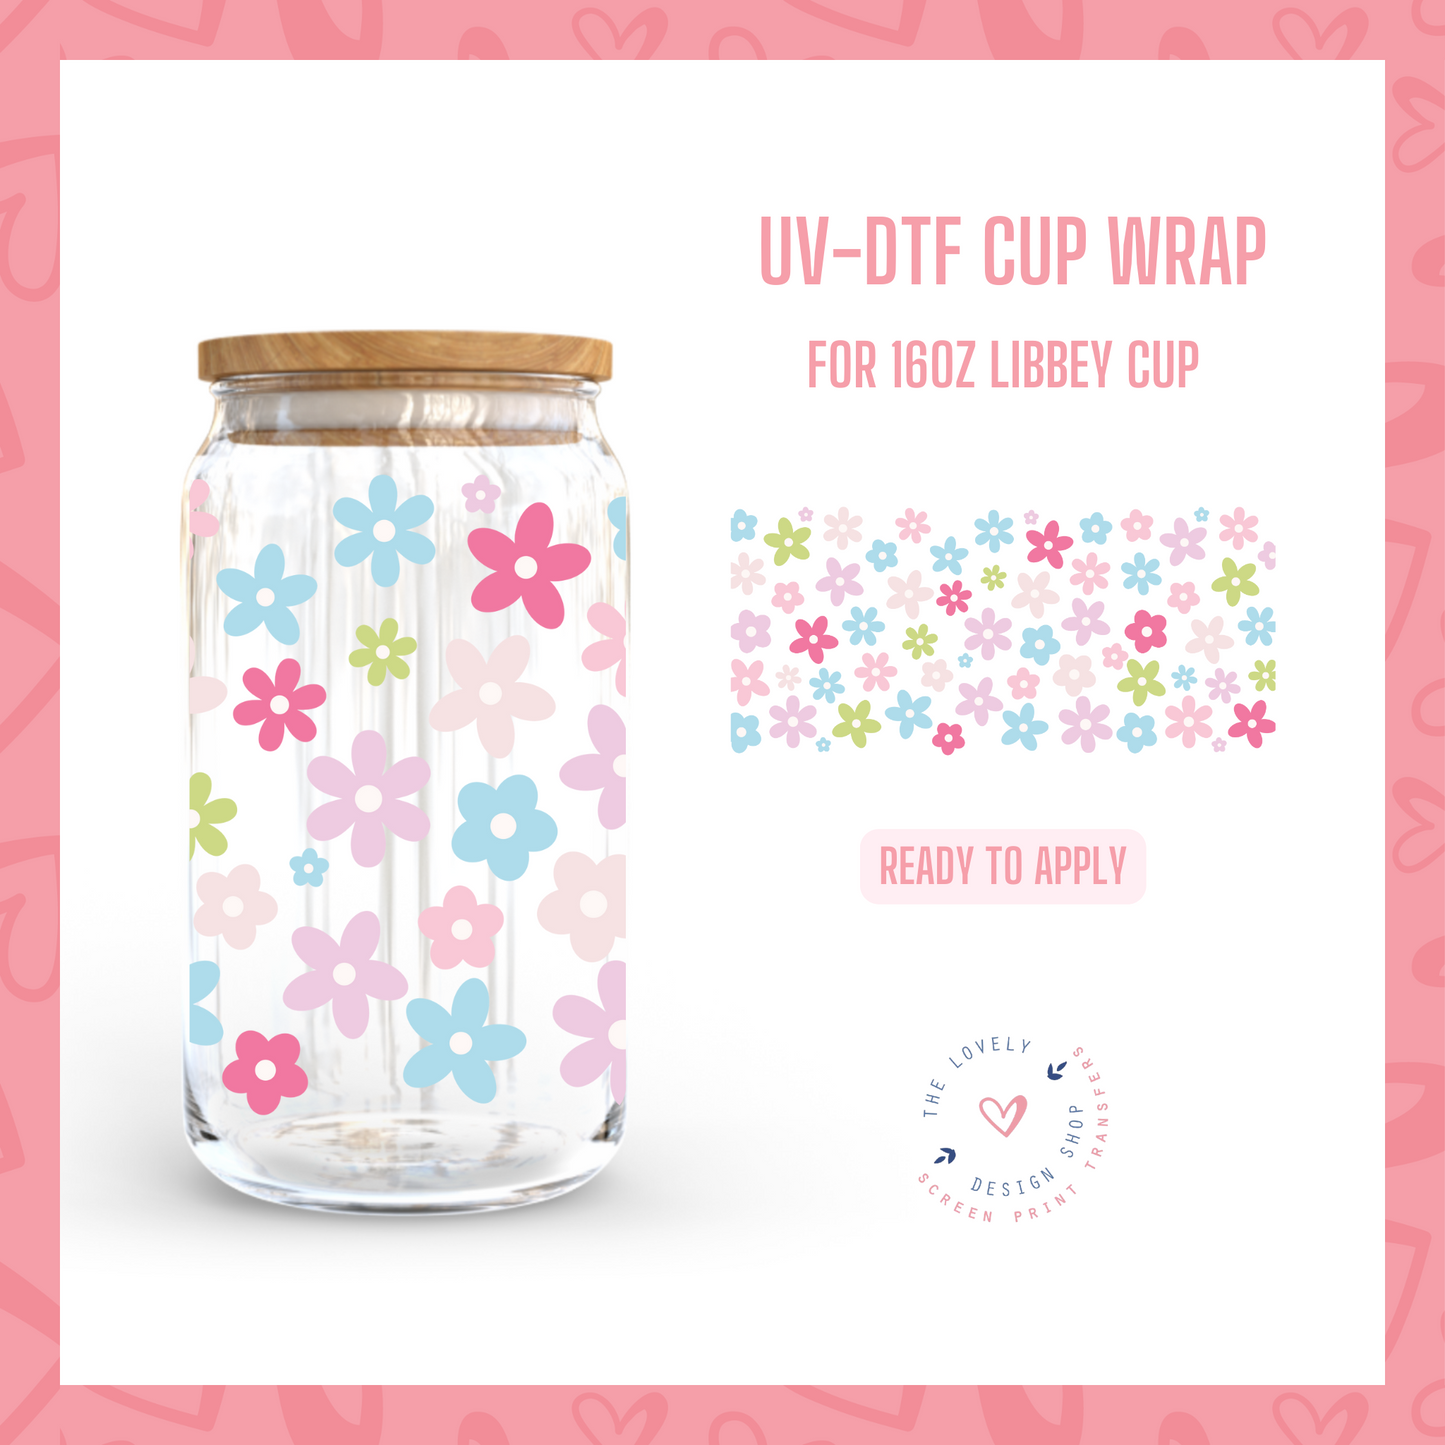 Floral Chaos - UV DTF 16 oz Libbey Cup Wrap (Ready to Ship) Mar 26